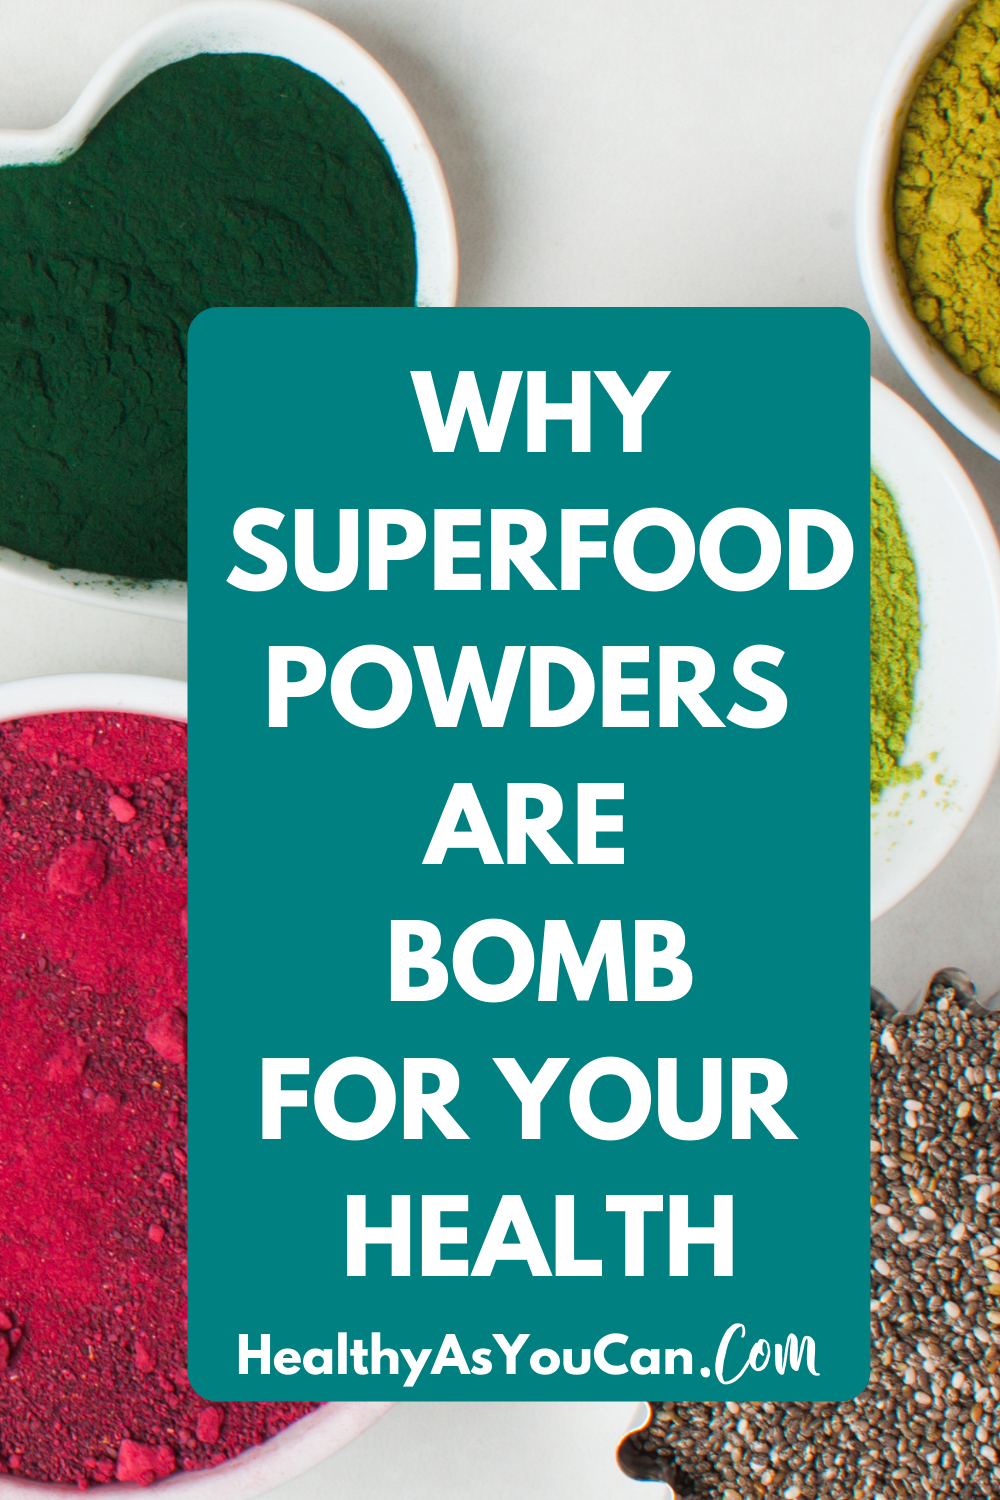 Why You Should Use Superfood Powders